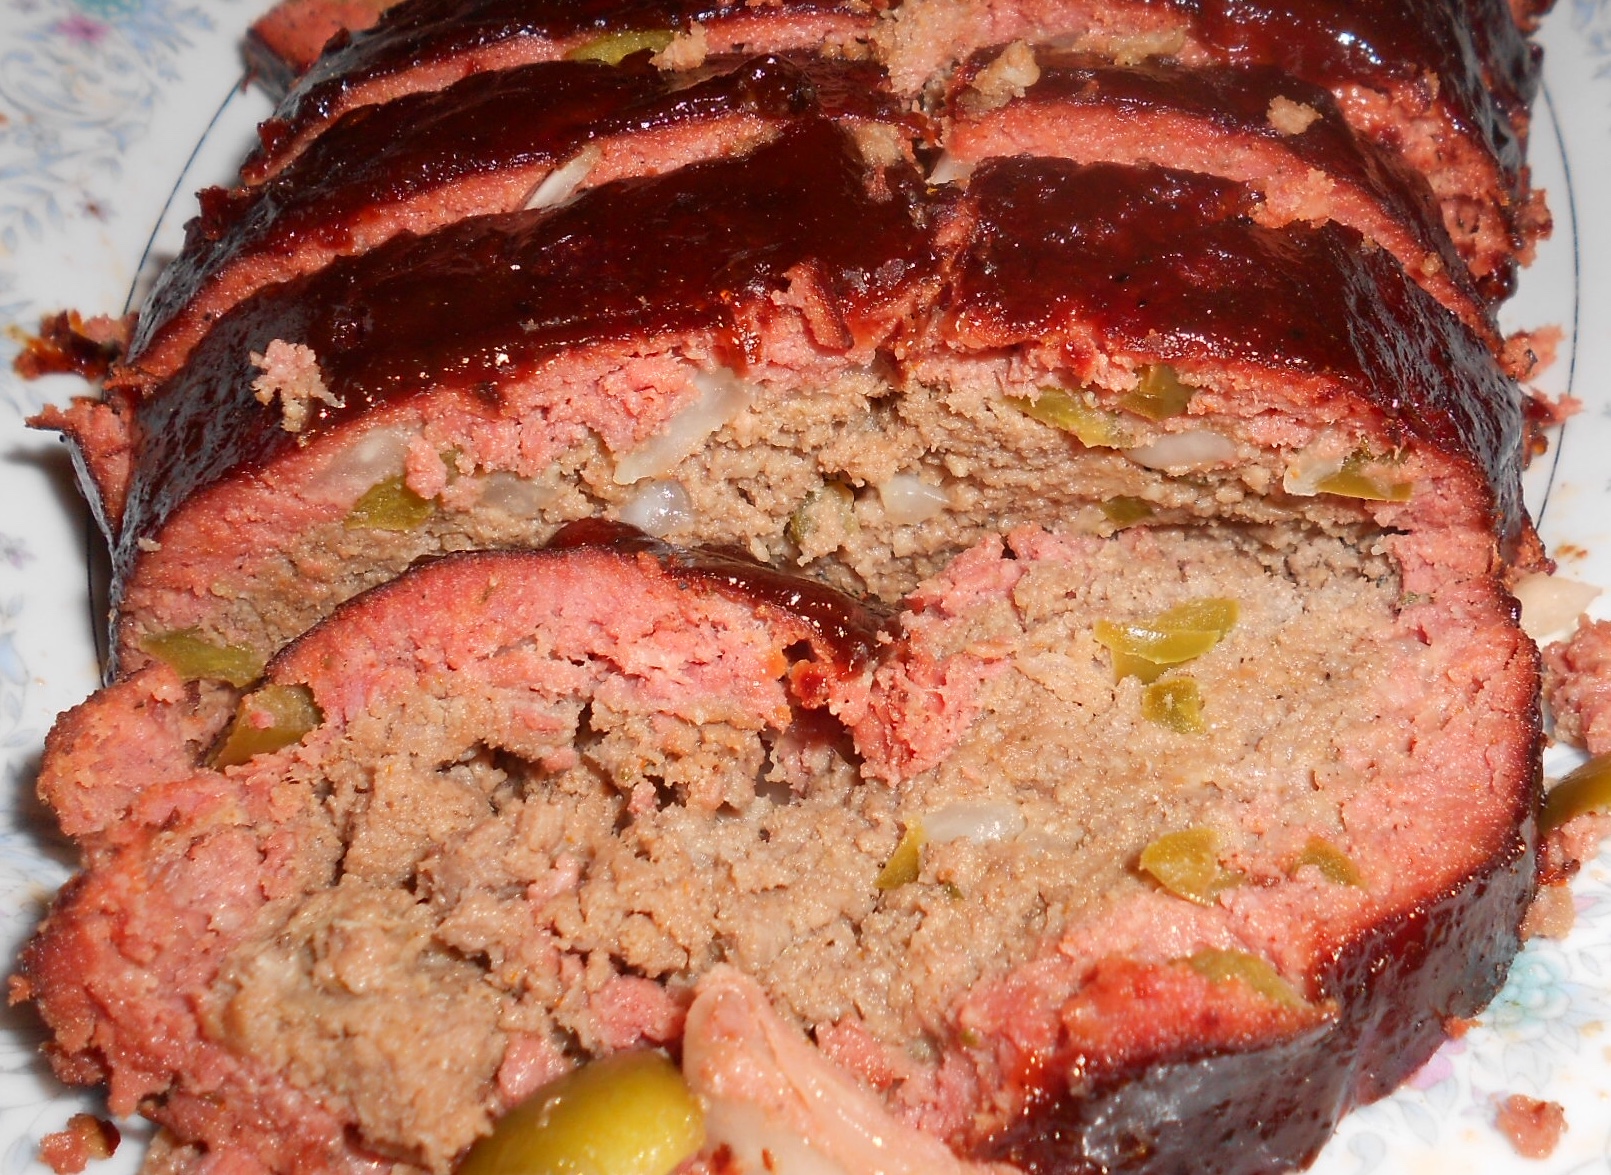 Smoked Meatloaf (See Recipes)